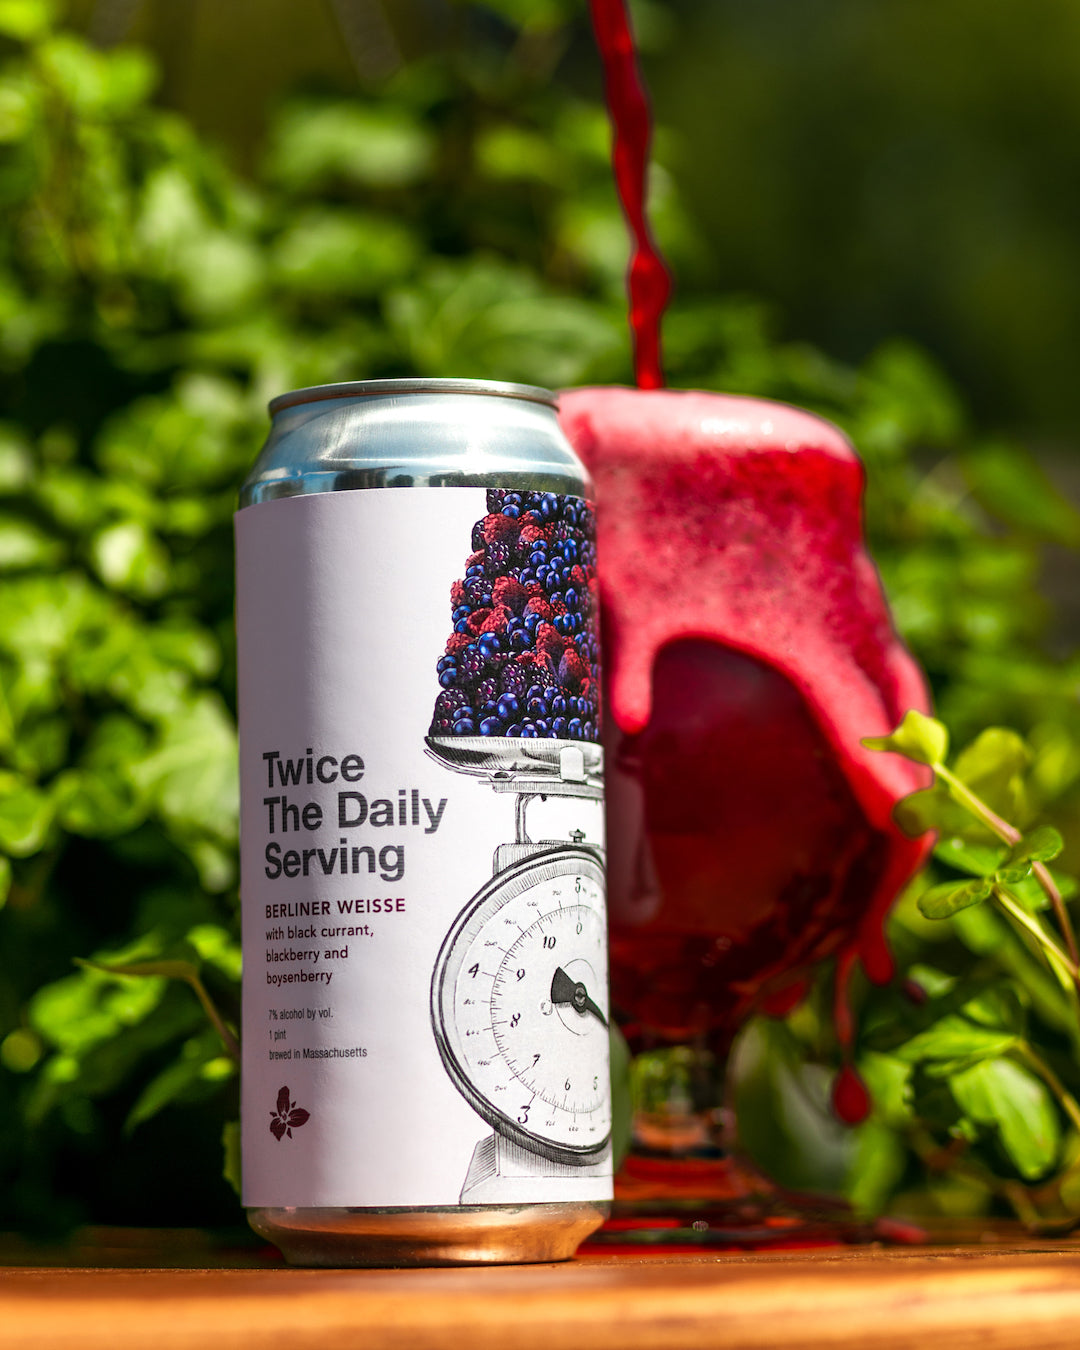 Twice the Daily Serving: Black Currant, Blackberry & Boysenberry